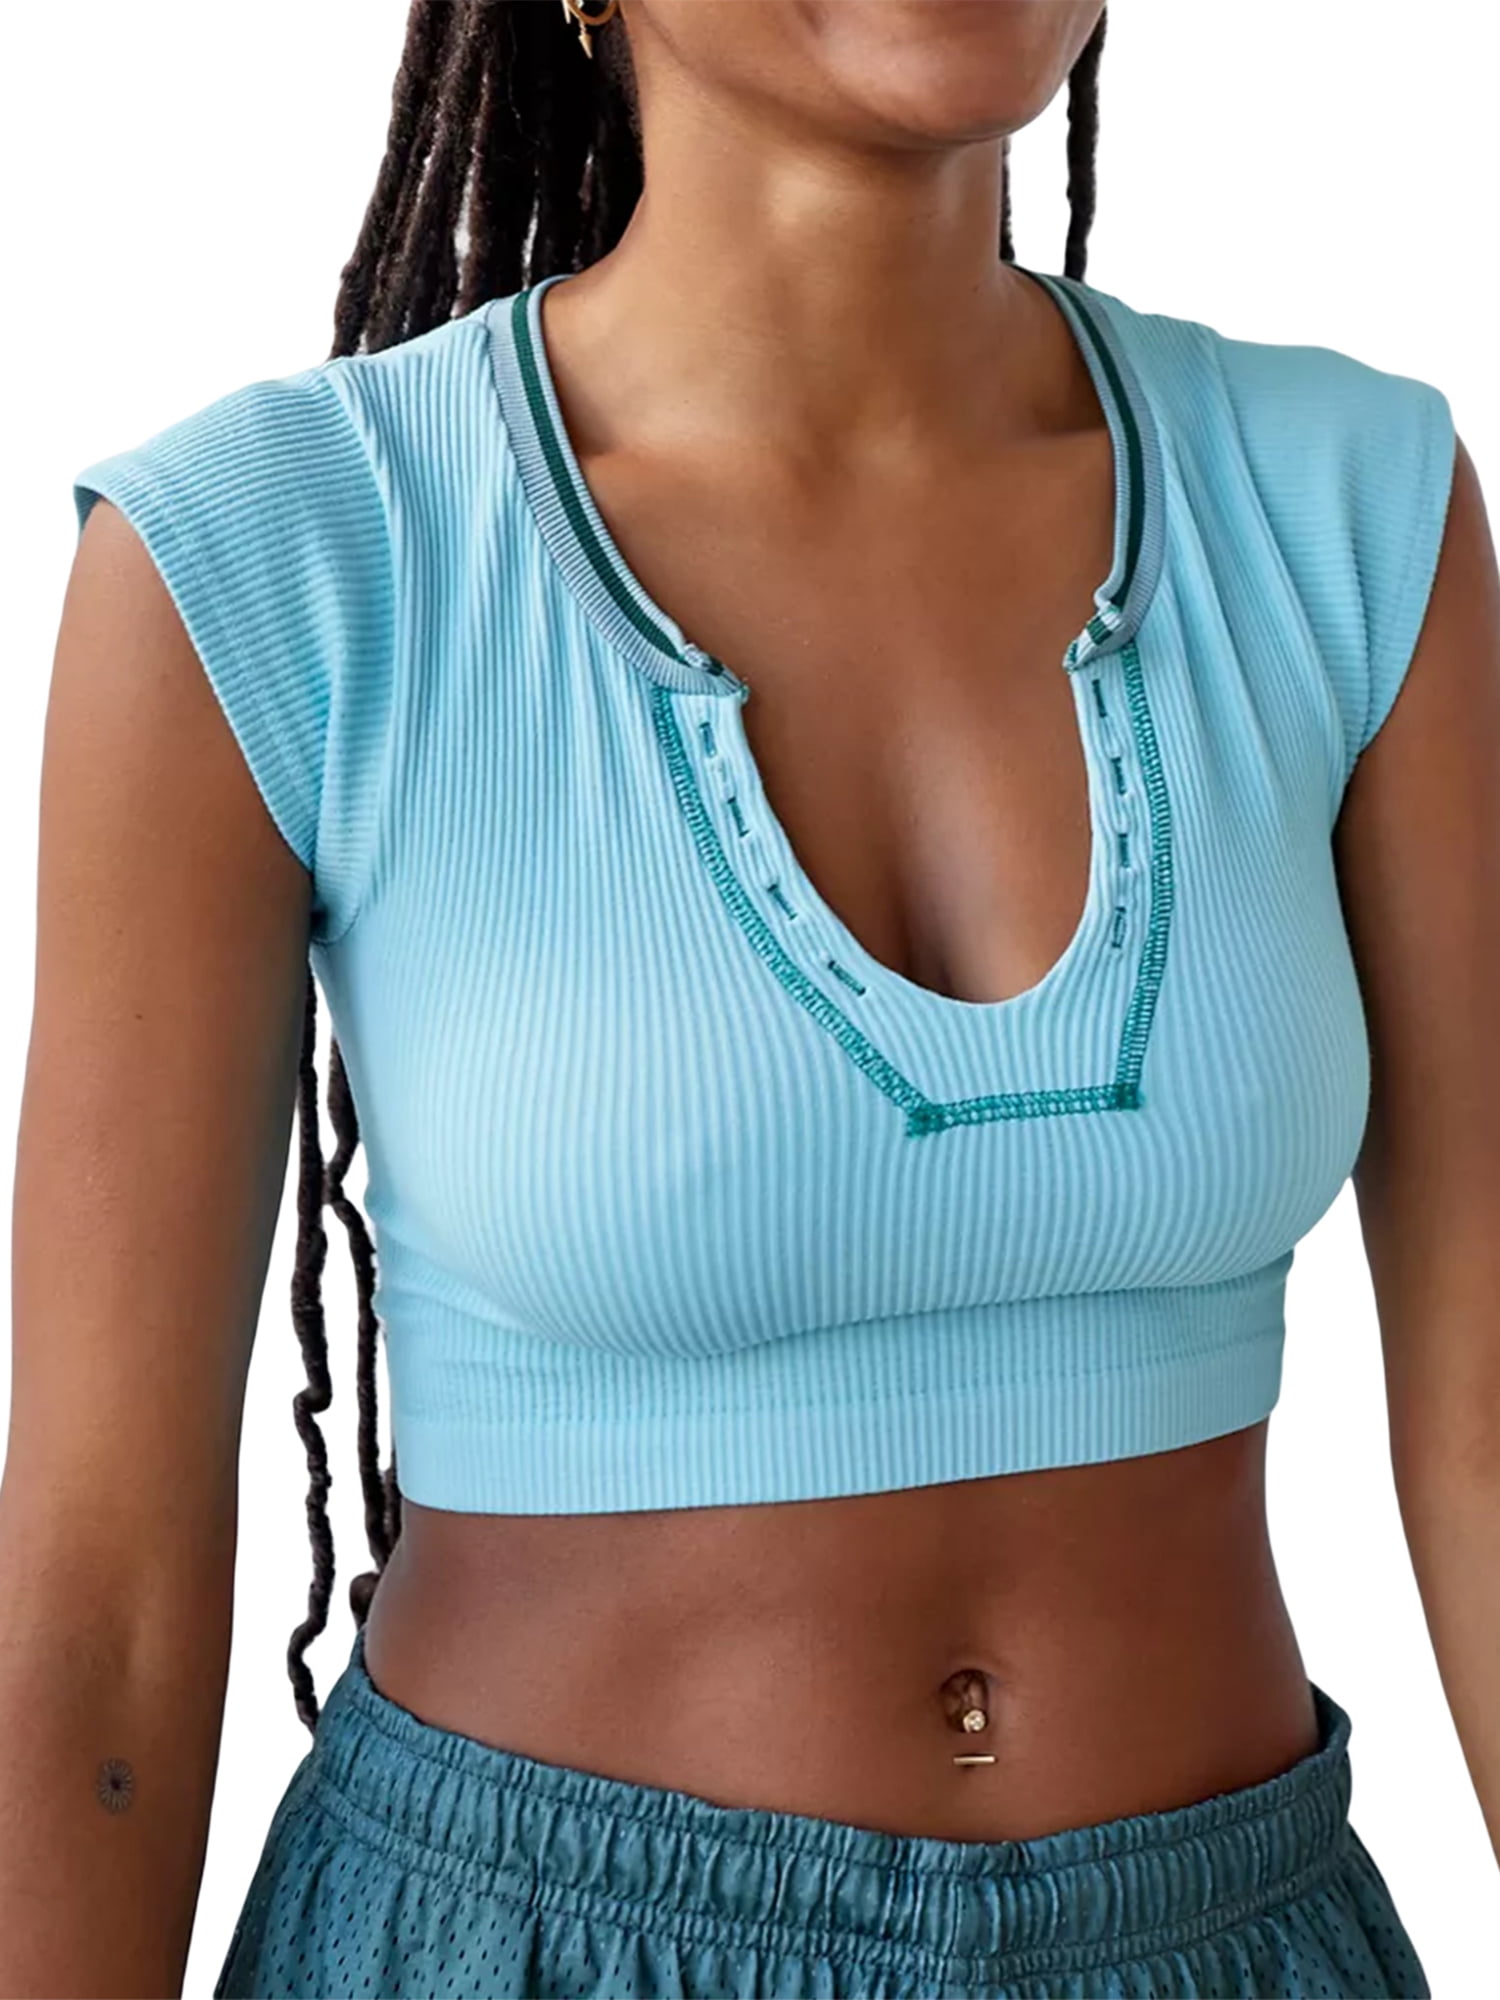 Women Y2k Baby Tees Crop Top Short Sleeve Skims Dupes Going Out Tops Workout  Athletic Gym Yoga Basic Shirt 